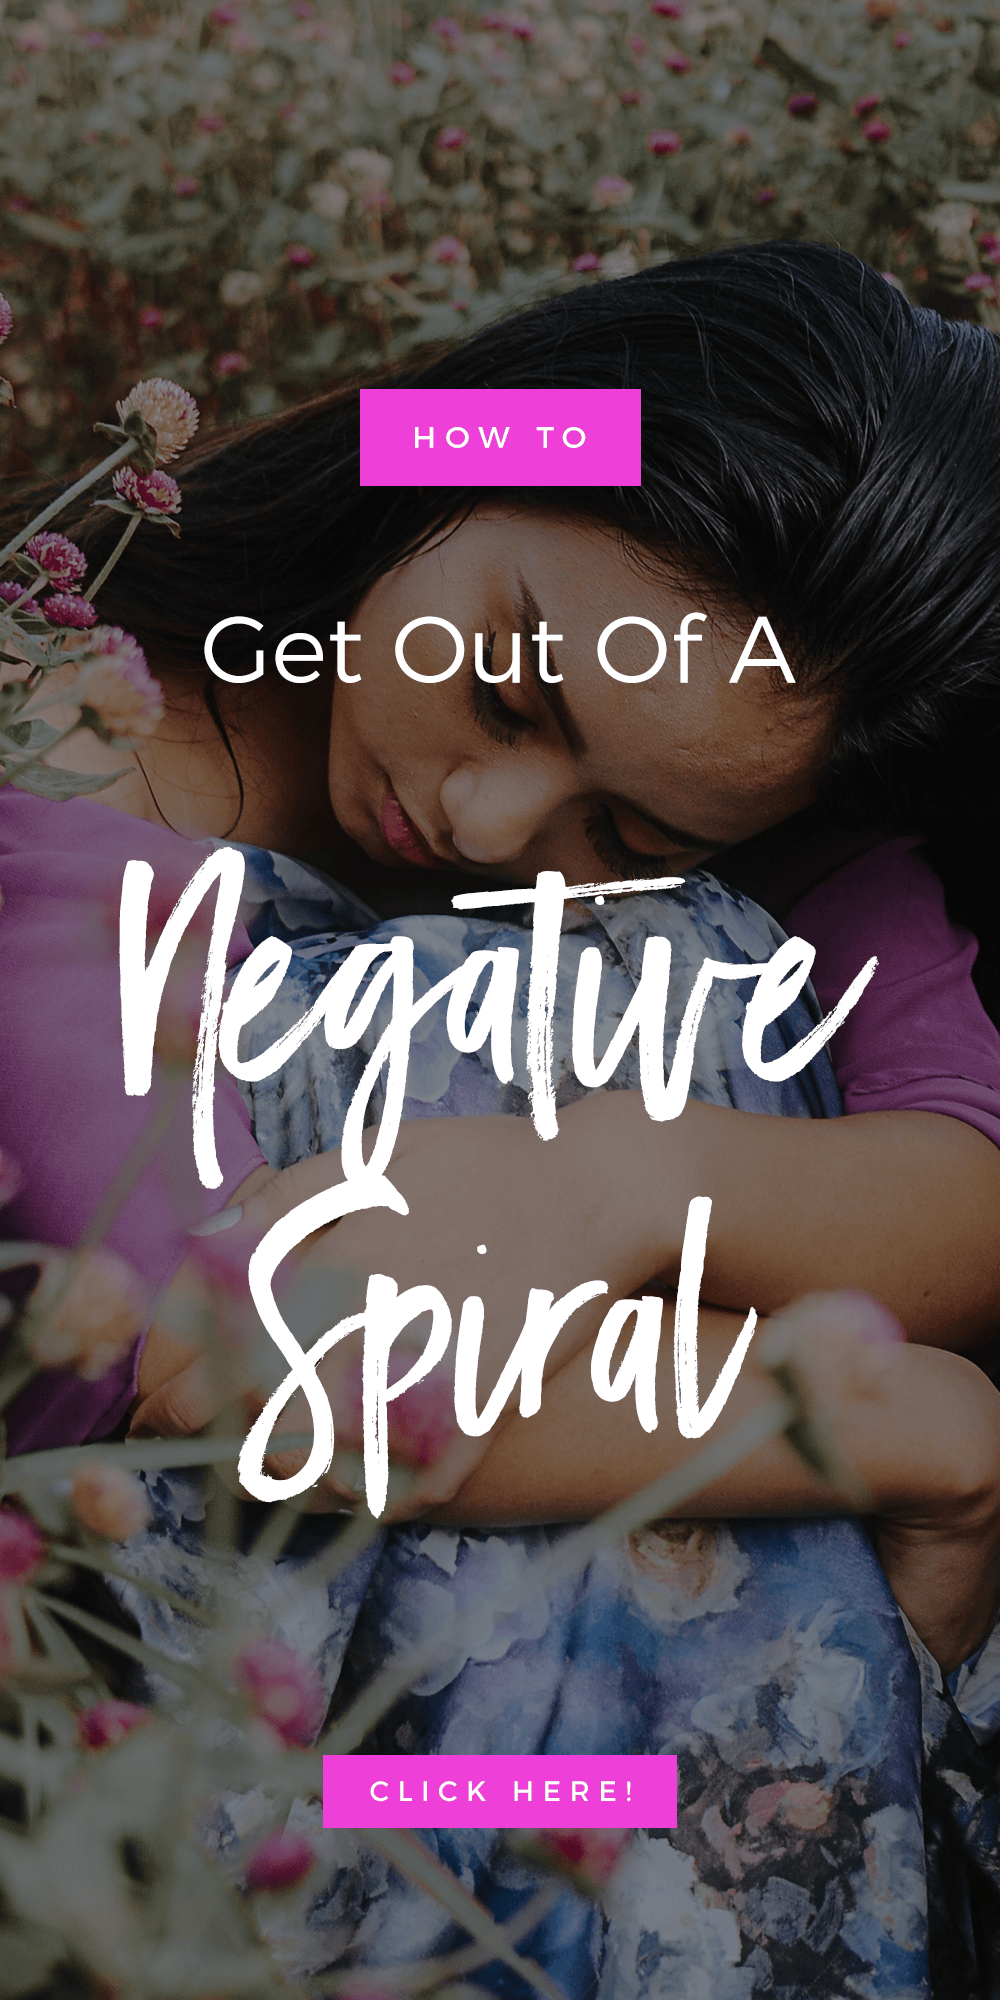 How To Get Out Of A Negative Spiral